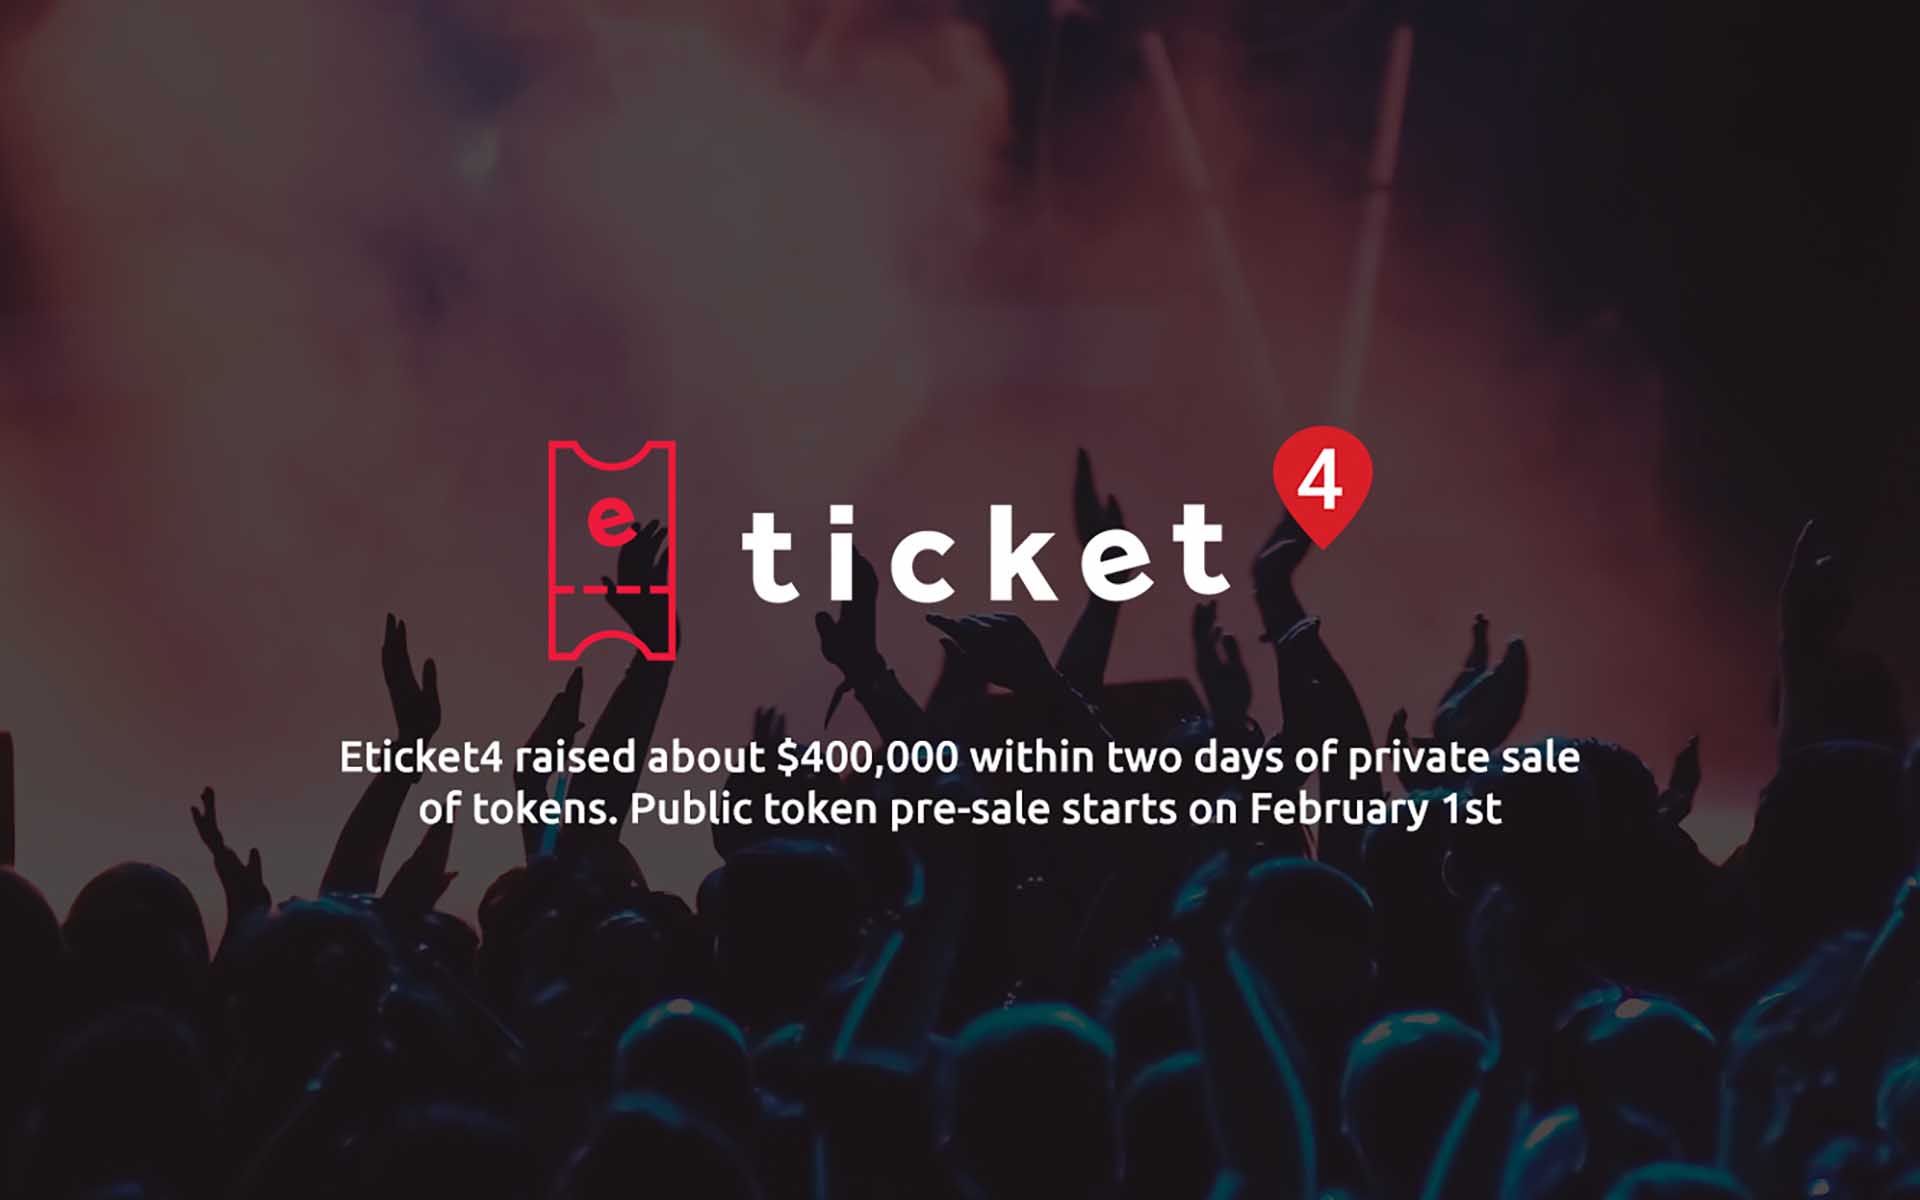 Eticket4 Successfully Completed Pre-ICO, Selling 800,000 ET4 Tokens for Almost $ 700,000